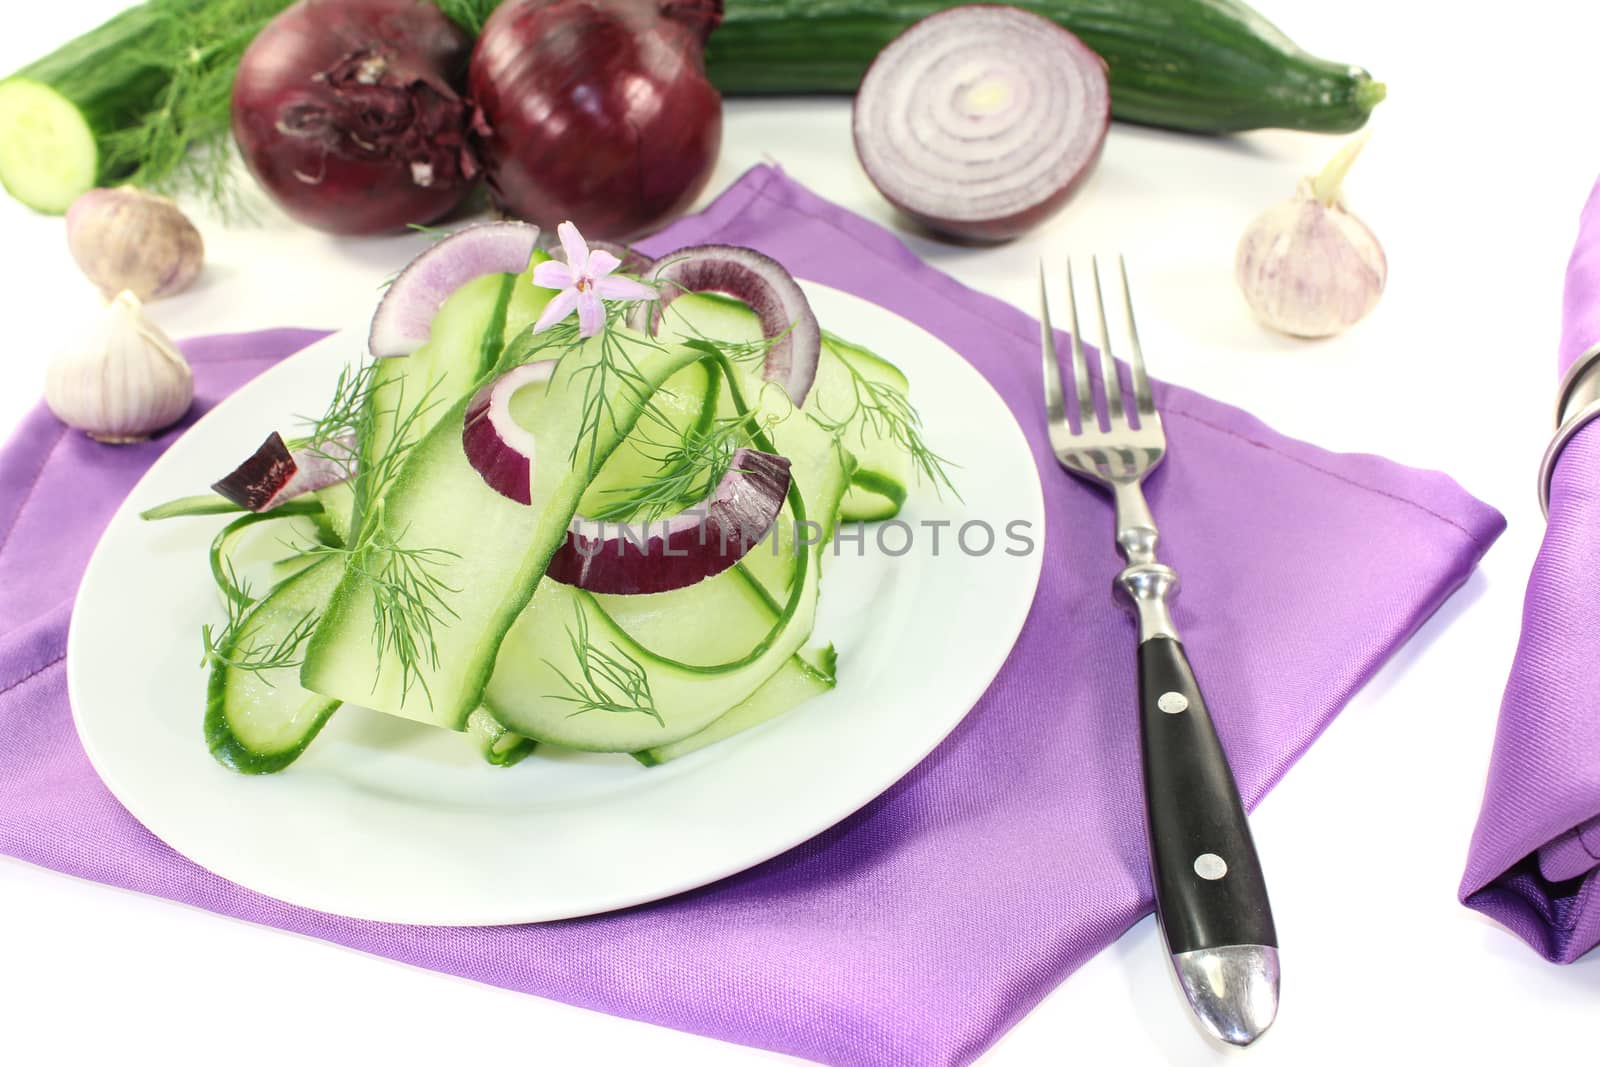 Cucumber salad with dill and garlic flower by discovery